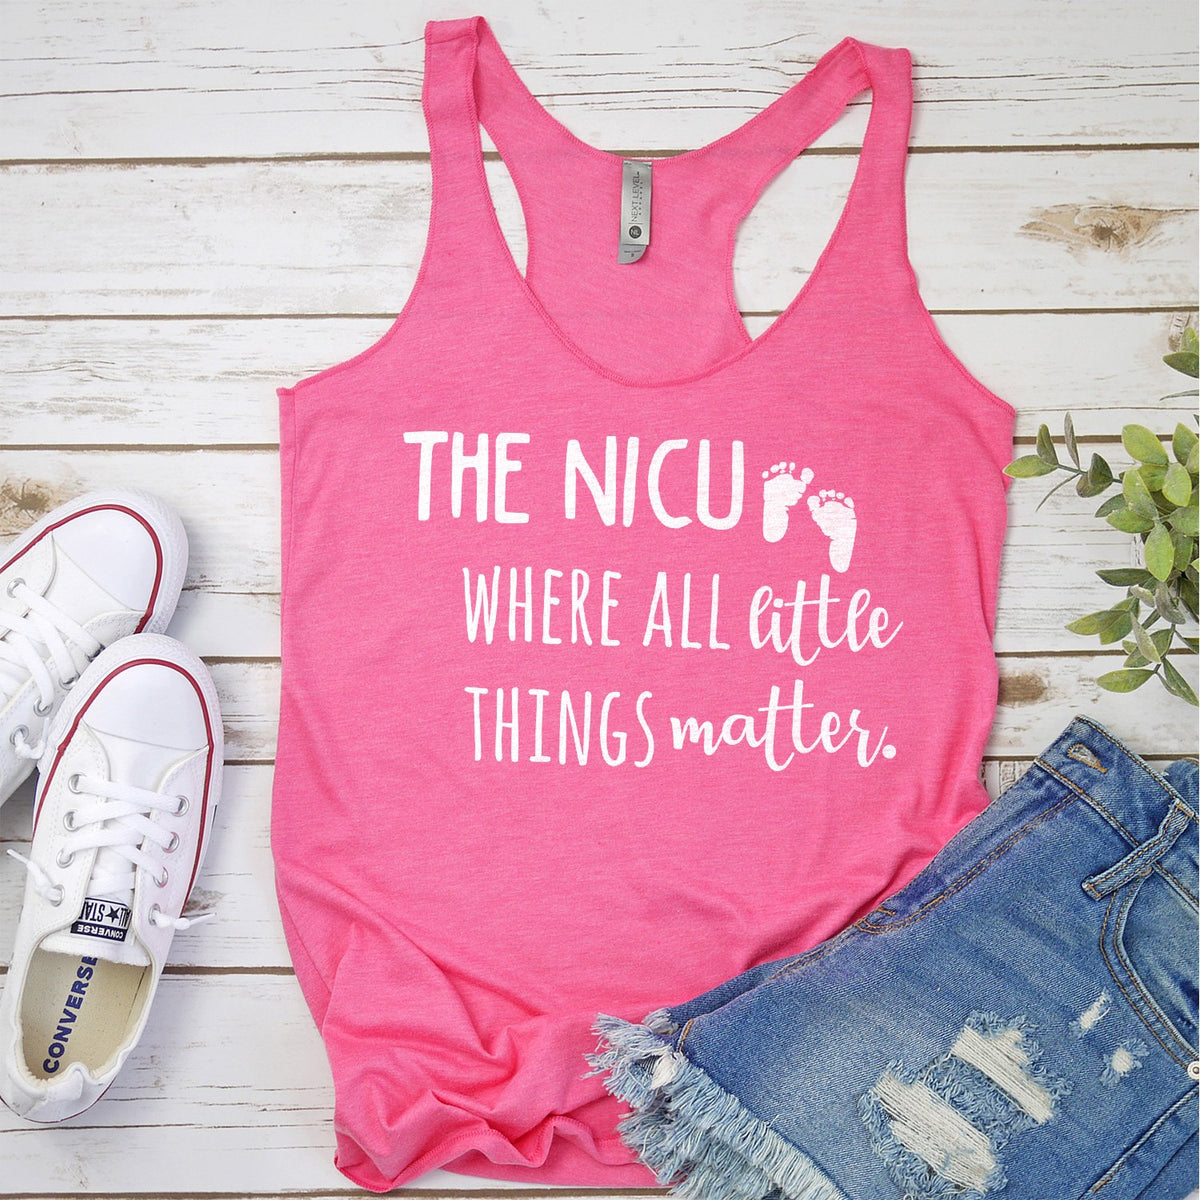 The NICU Where All Little Things Matter - Tank Top Racerback